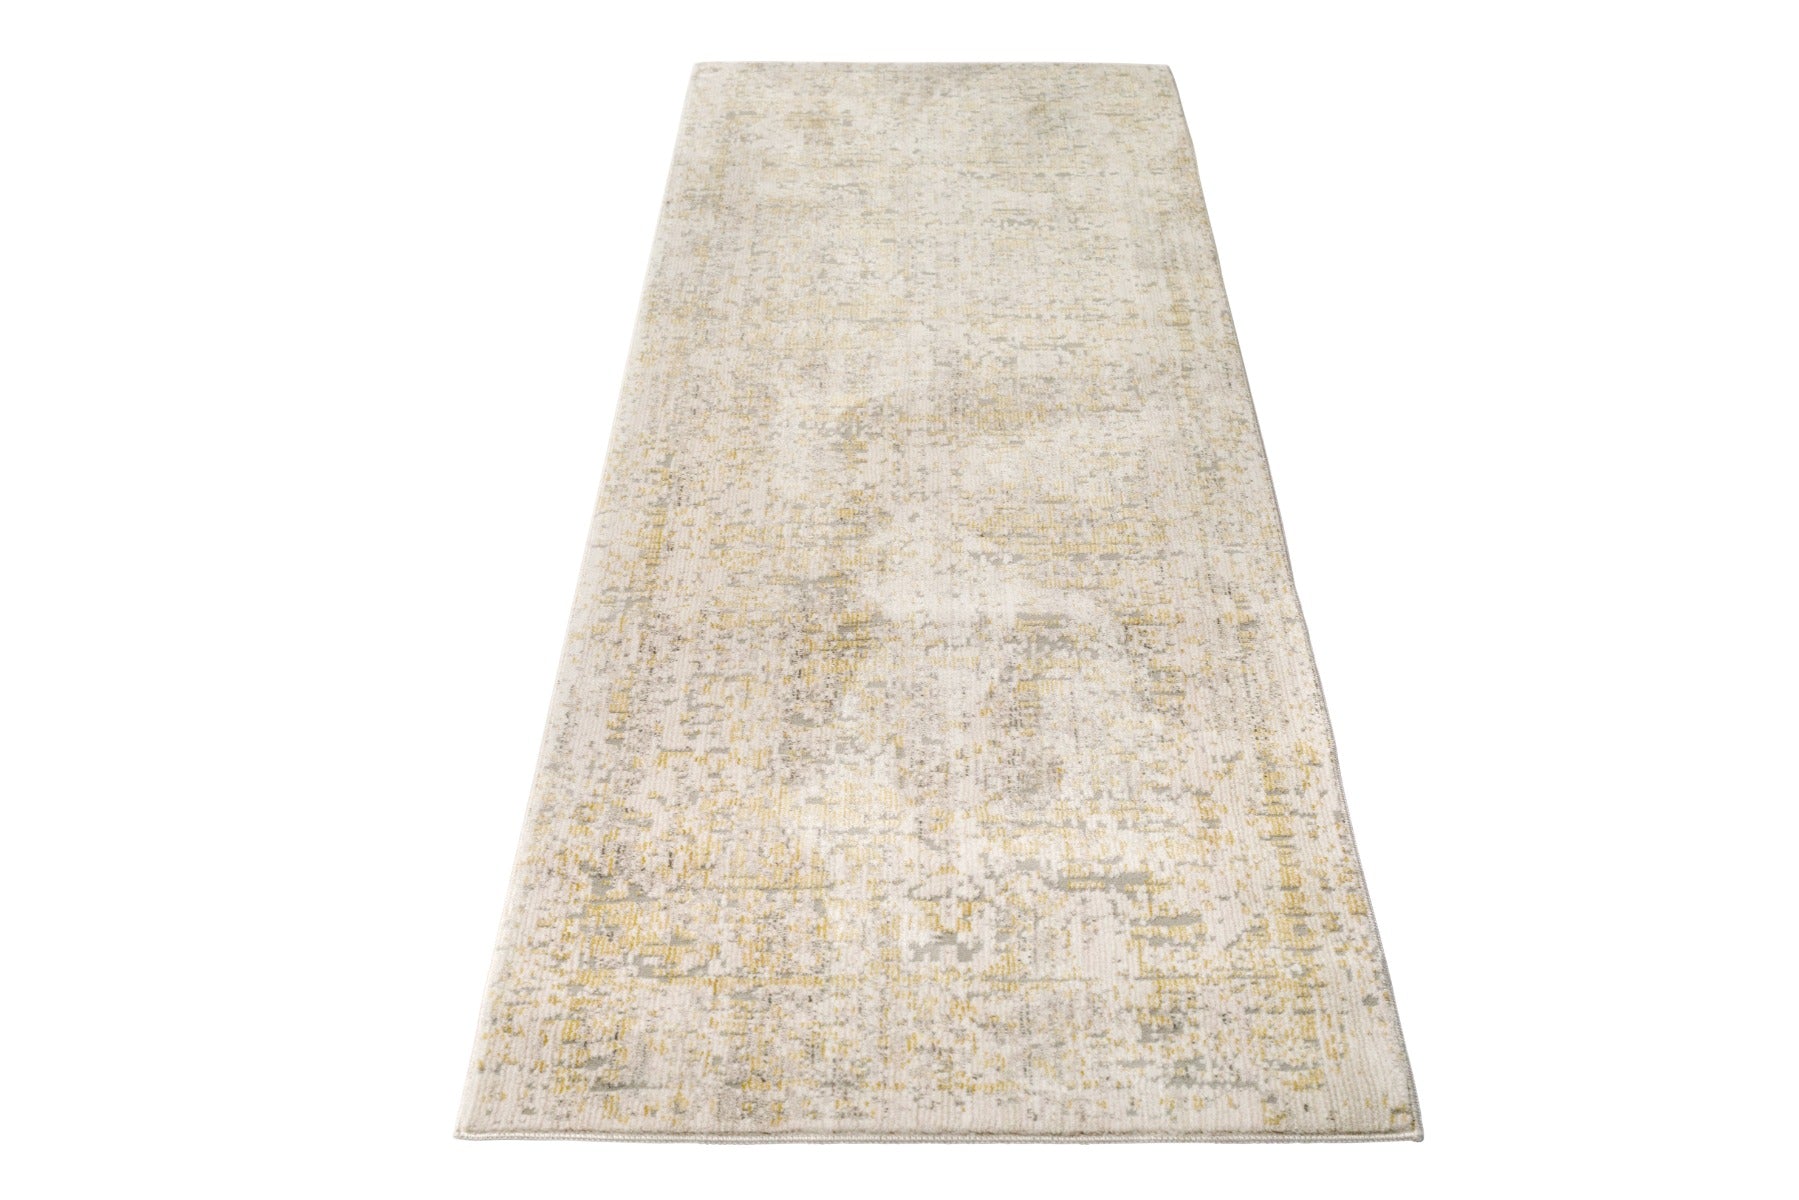 Persian style hallway runner in yellow and grey